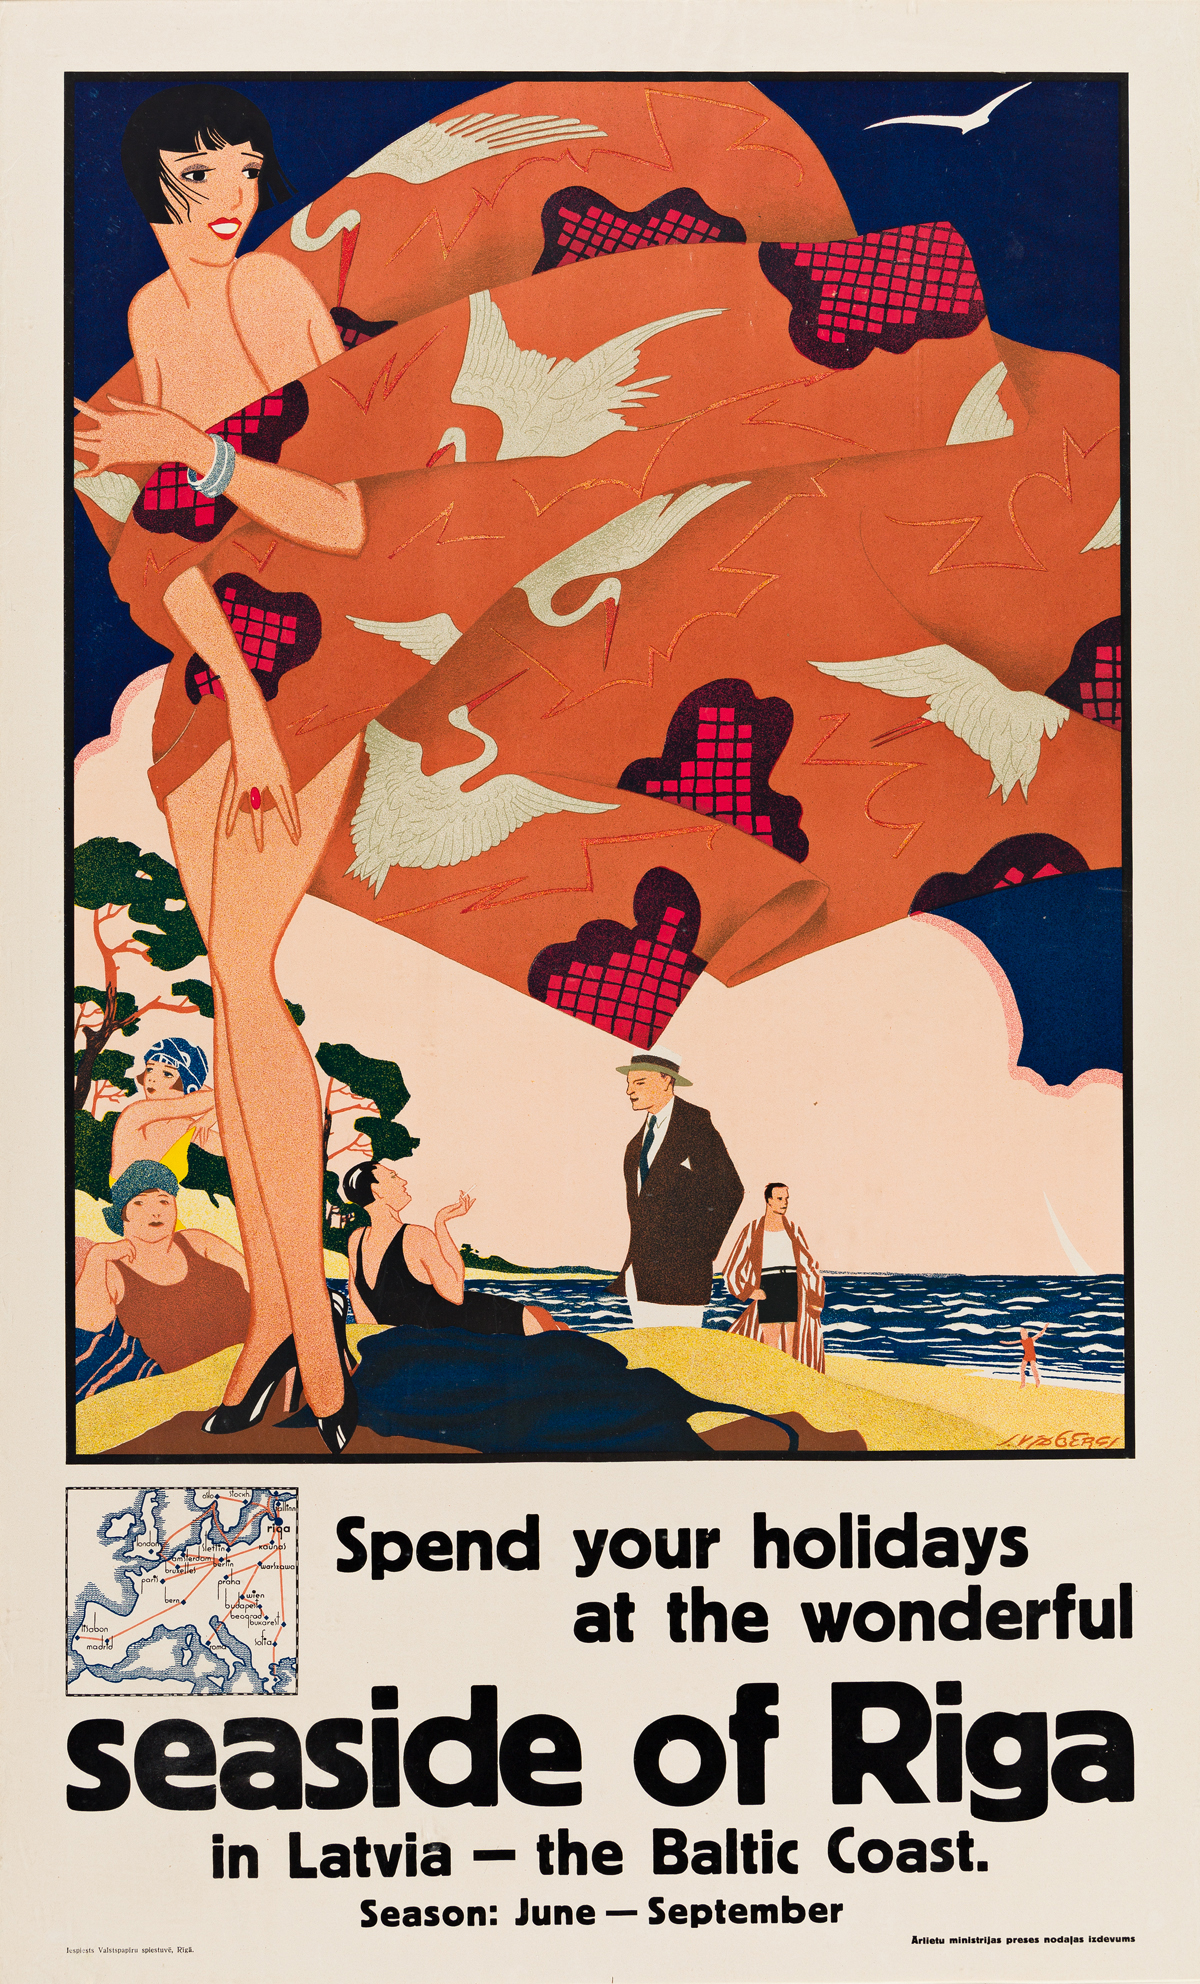 Sigismunds Vidbergs (1890-1970).  SPEND YOUR HOLIDAYS AT THE WONDERFUL SEASIDE OF RIGA. Circa 1925.